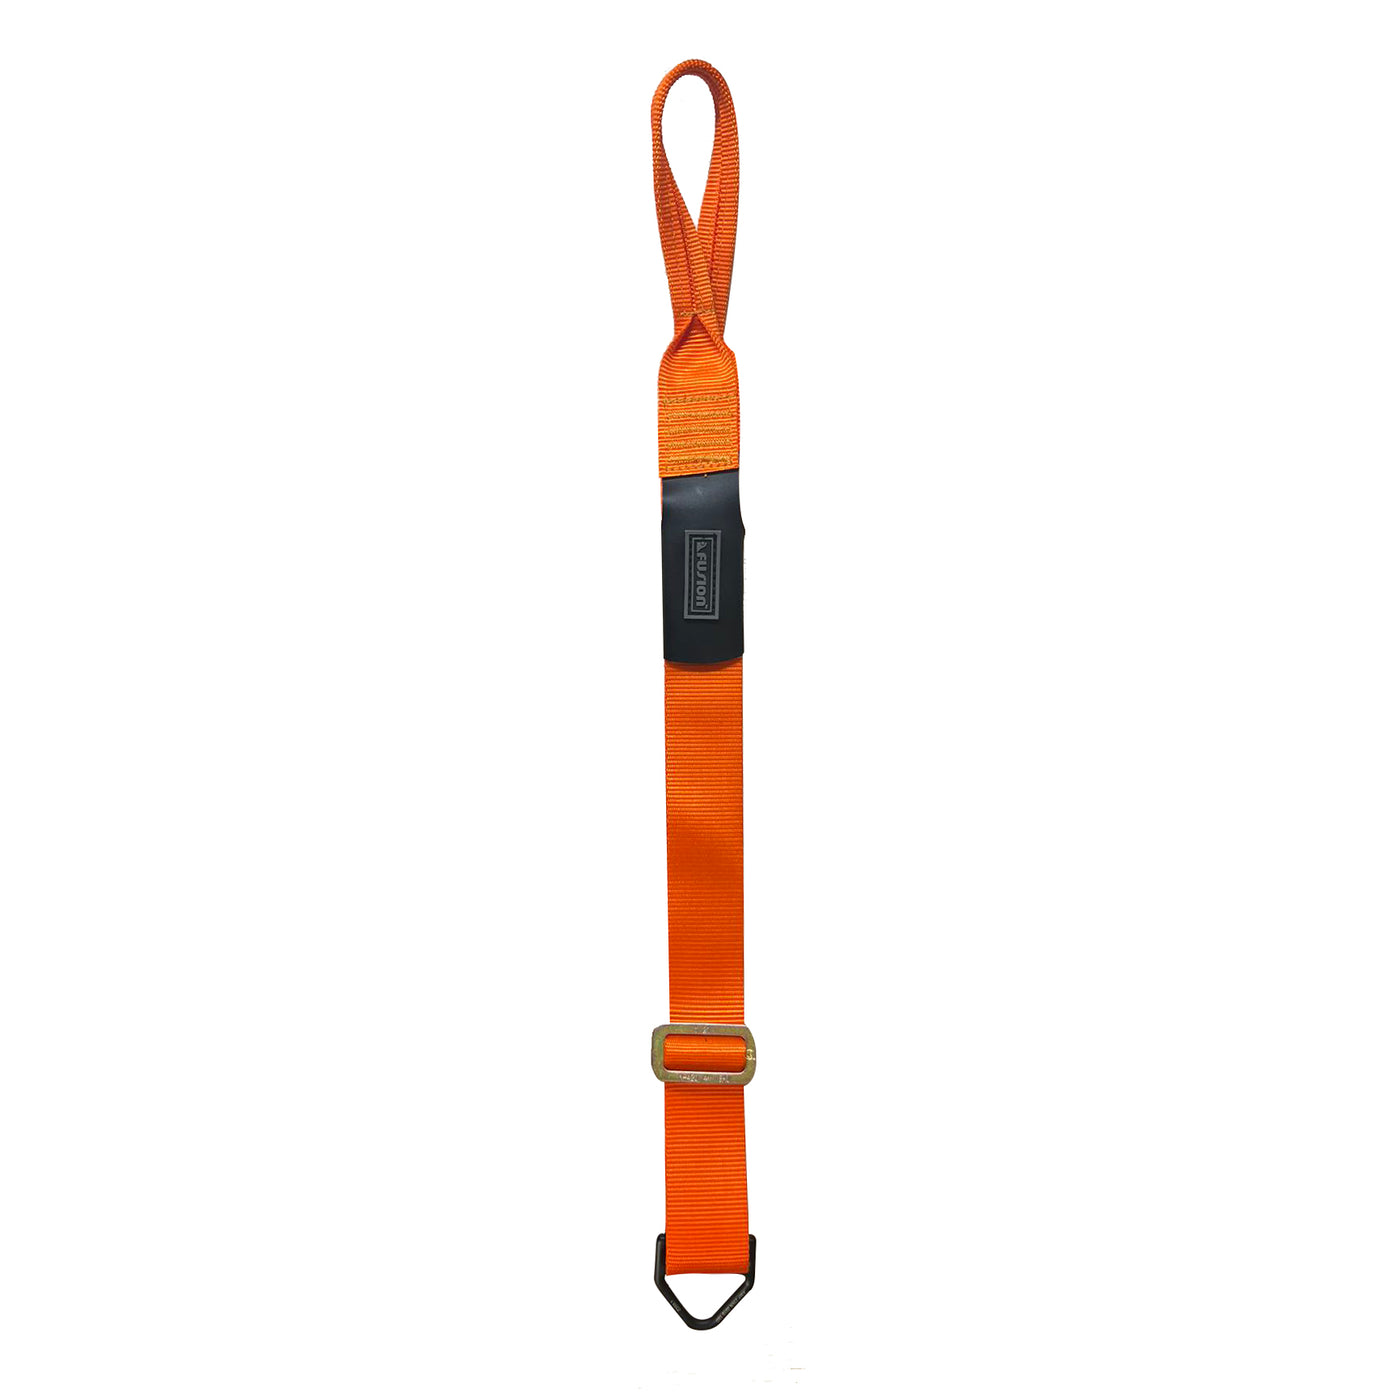 Adjustable Lanyard – 24” Nylon Webbing with D-Ring and Double Layered Gear loop